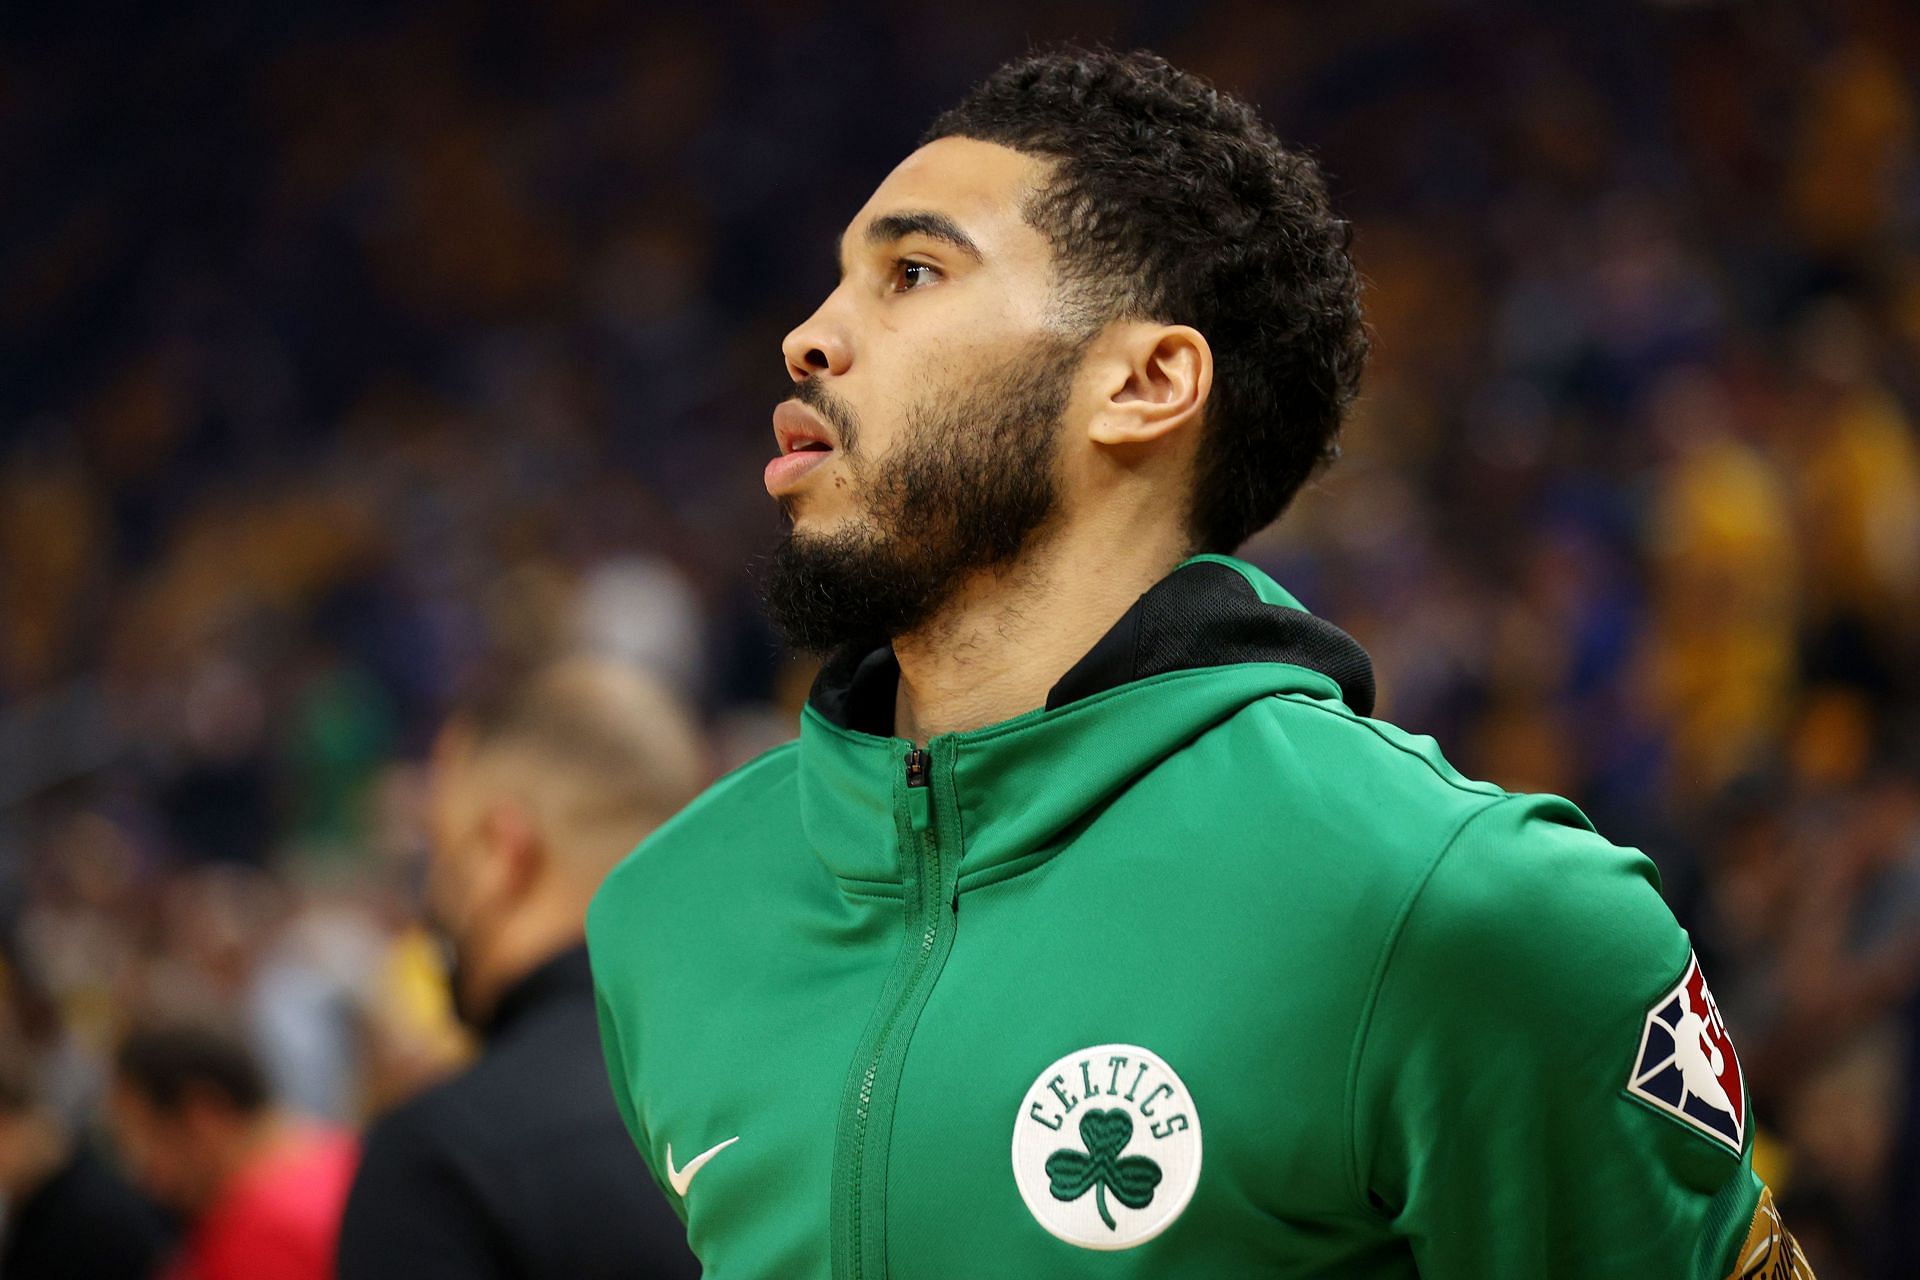 Even with top-players like Jaylen Brown and Marcus Smart, Jayson Tatum remains the premier player for the Boston Celtics.